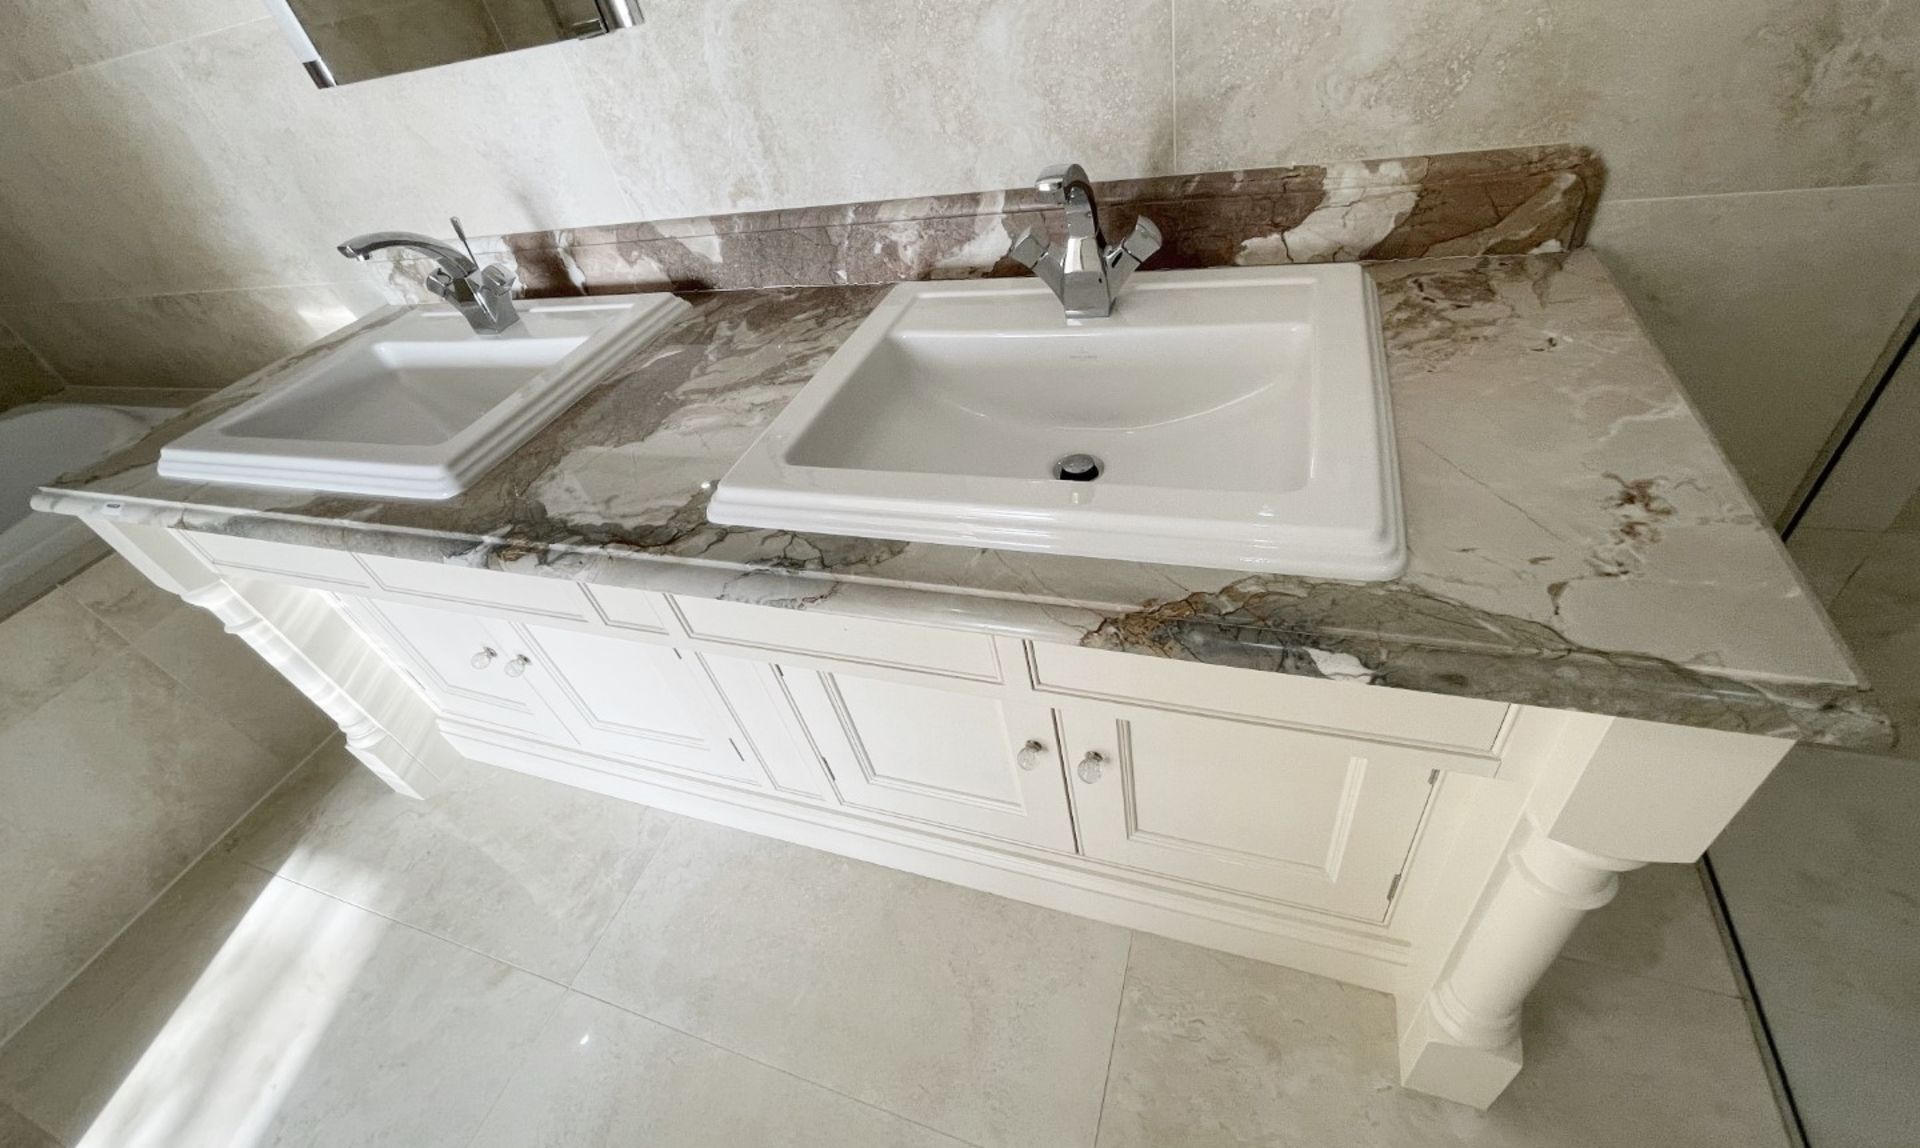 1 x Bespoke Marble-topped Solid Wood Double Vanity Unit with 2 x Villeroy & Boch Basins + Taps - Image 10 of 33